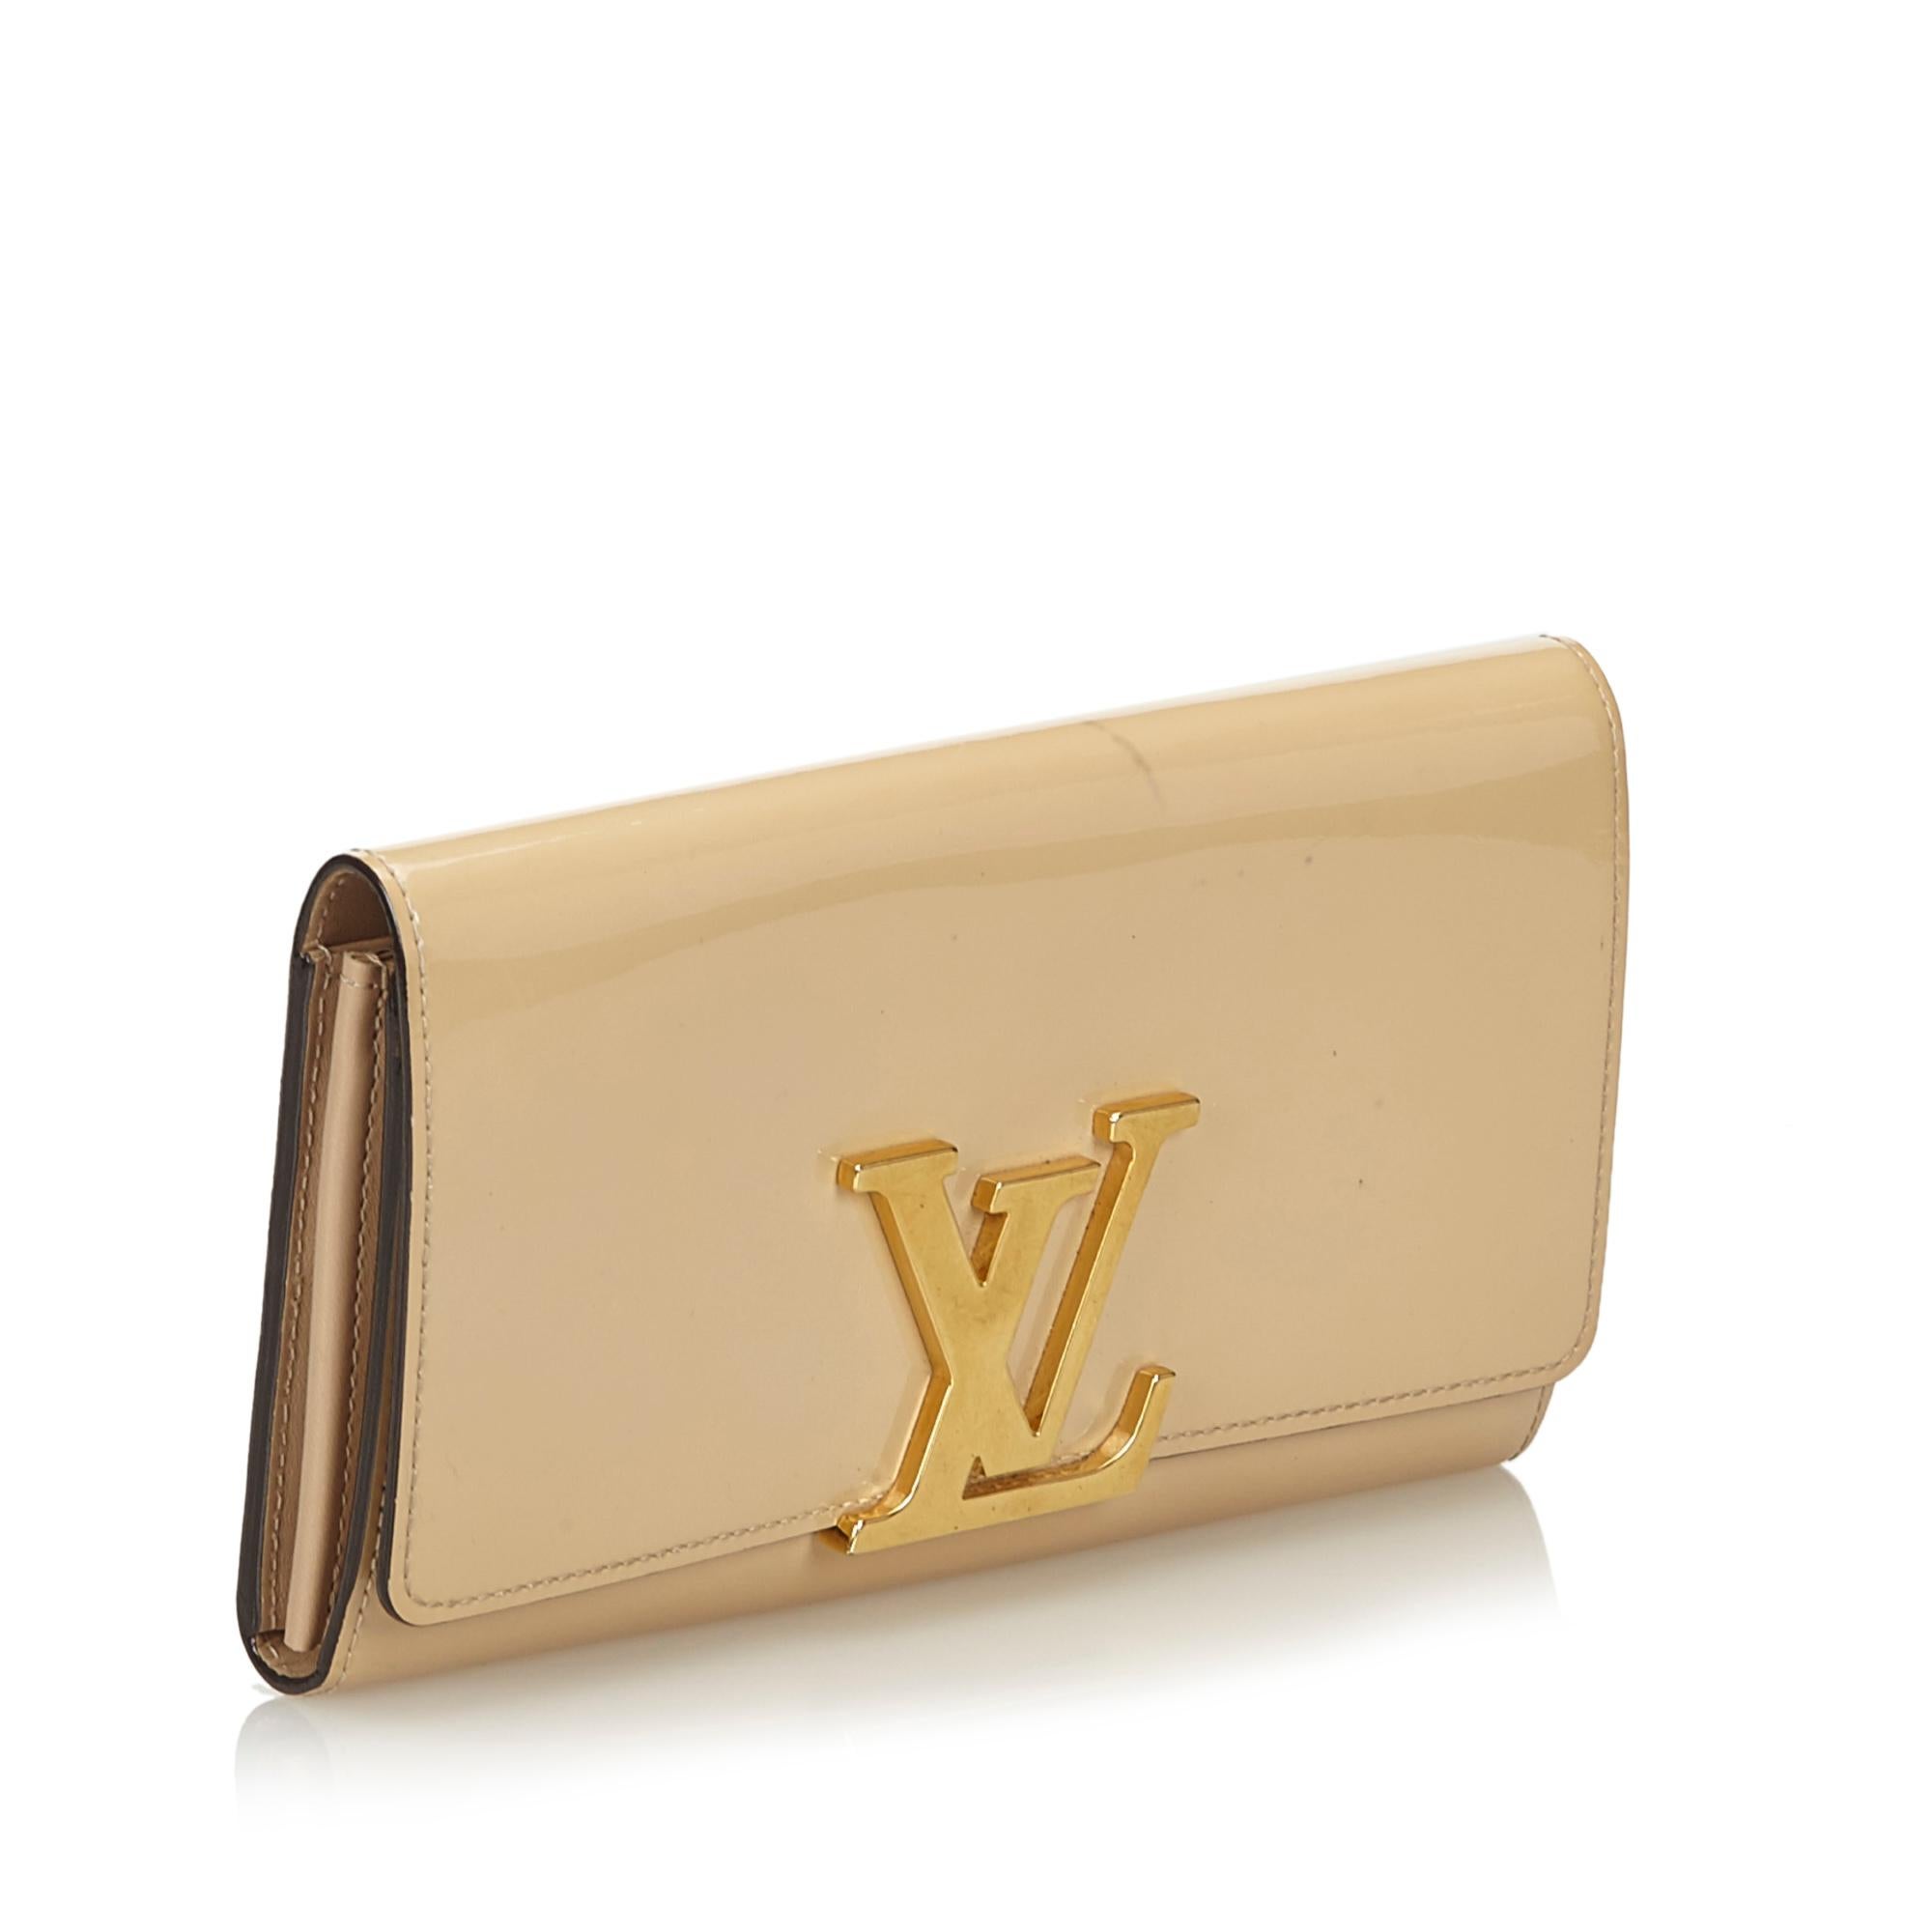 The Louise wallet features a patent leather body, a gold-tone metal logo, a front flap with a magnetic closure, and interior zip and slip pockets. It carries as B+ condition rating.

Inclusions: 
Dust Bag


Louis Vuitton pieces do not come with an